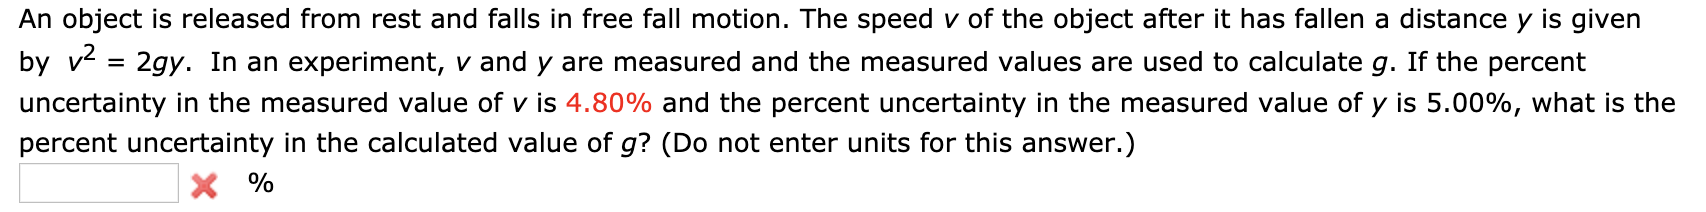 An object is released from rest and falls in free fall motion. The speed v of the object after it has fallen a distance y is given
by v
2gy. In an experiment, v and y are measured and the measured values are used to calculate g. If the percent
uncertainty in the measured value of v is 4.80% and the percent uncertainty in the measured value of y is 5.00%, what is the
percent uncertainty in the calculated value of g? (Do not enter units for this answer.)
X%
